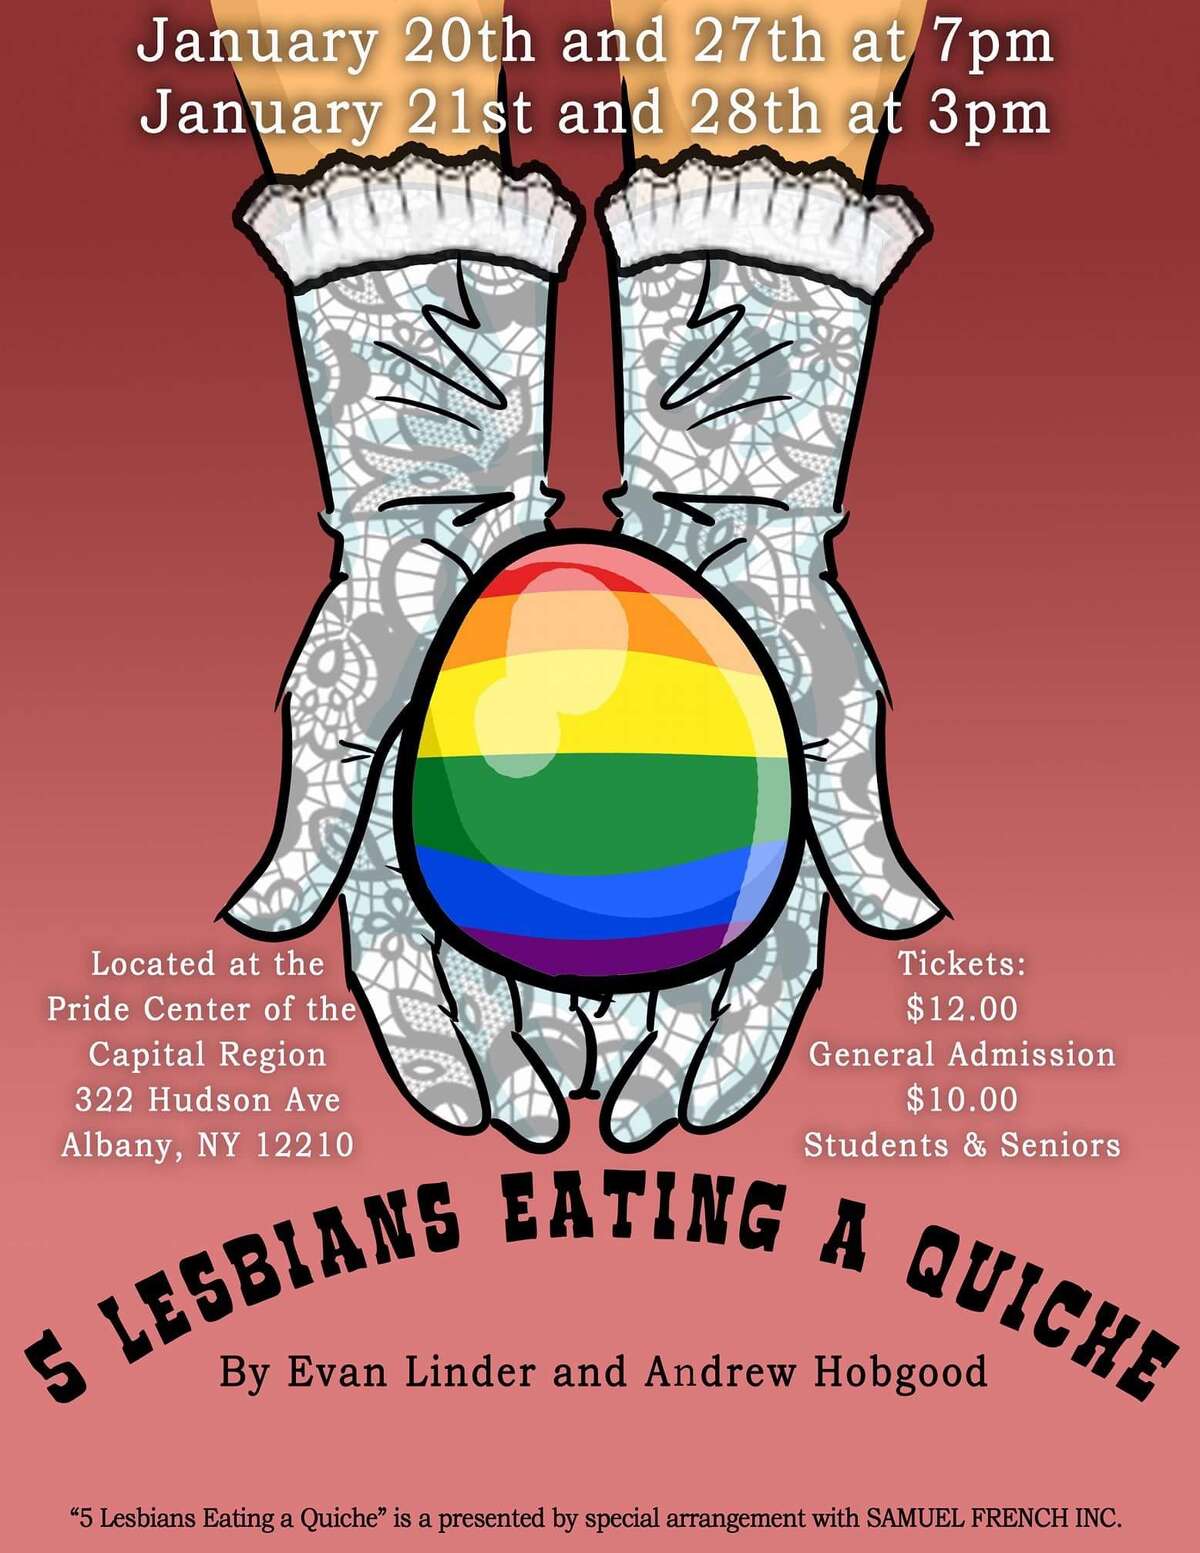 5 Lesbians Eating A Quiche Onstage At Pride Center